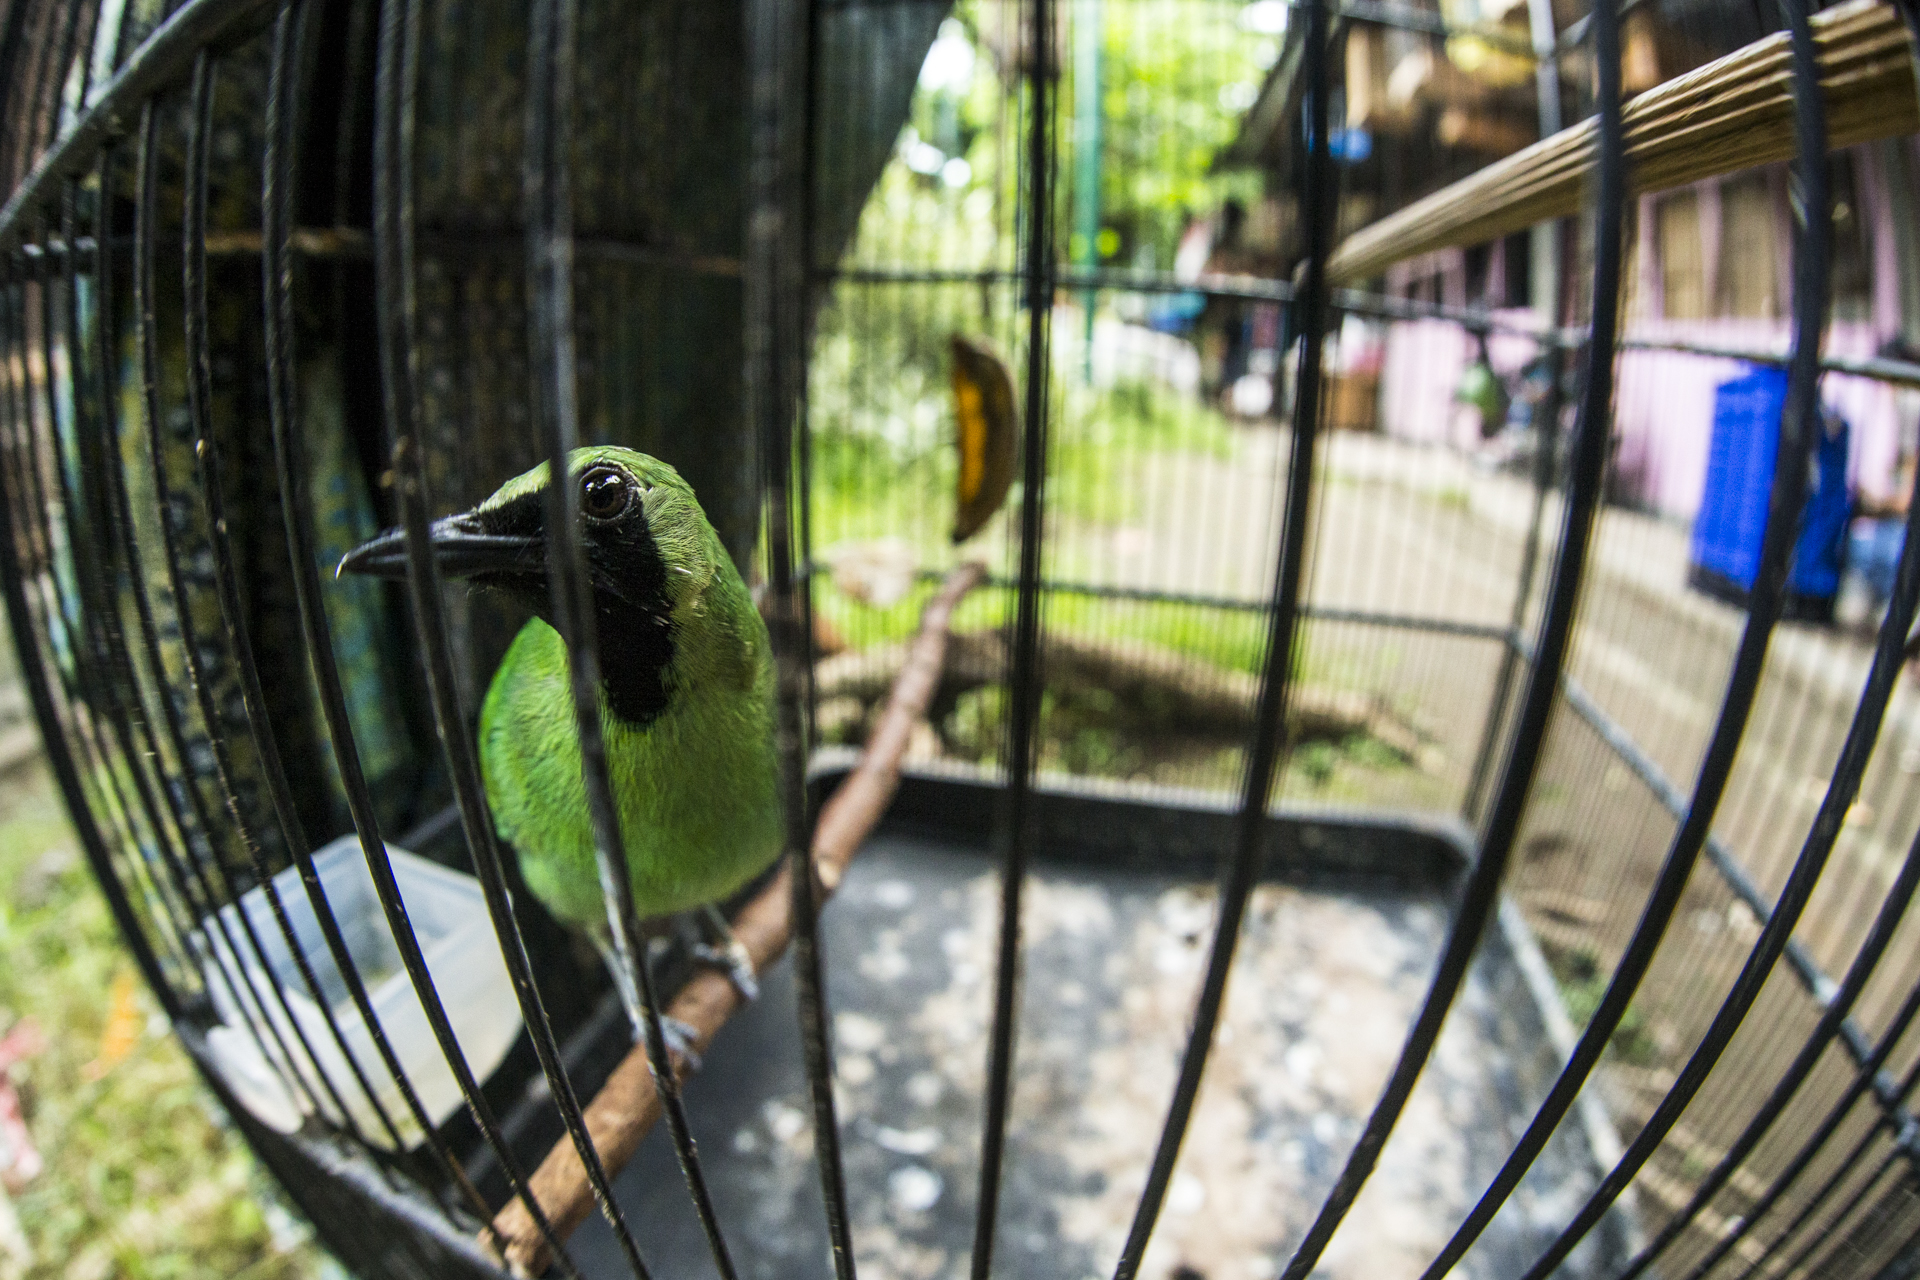  A greater green leafbird, one of the most commonly seen birds for sale in the markets. 